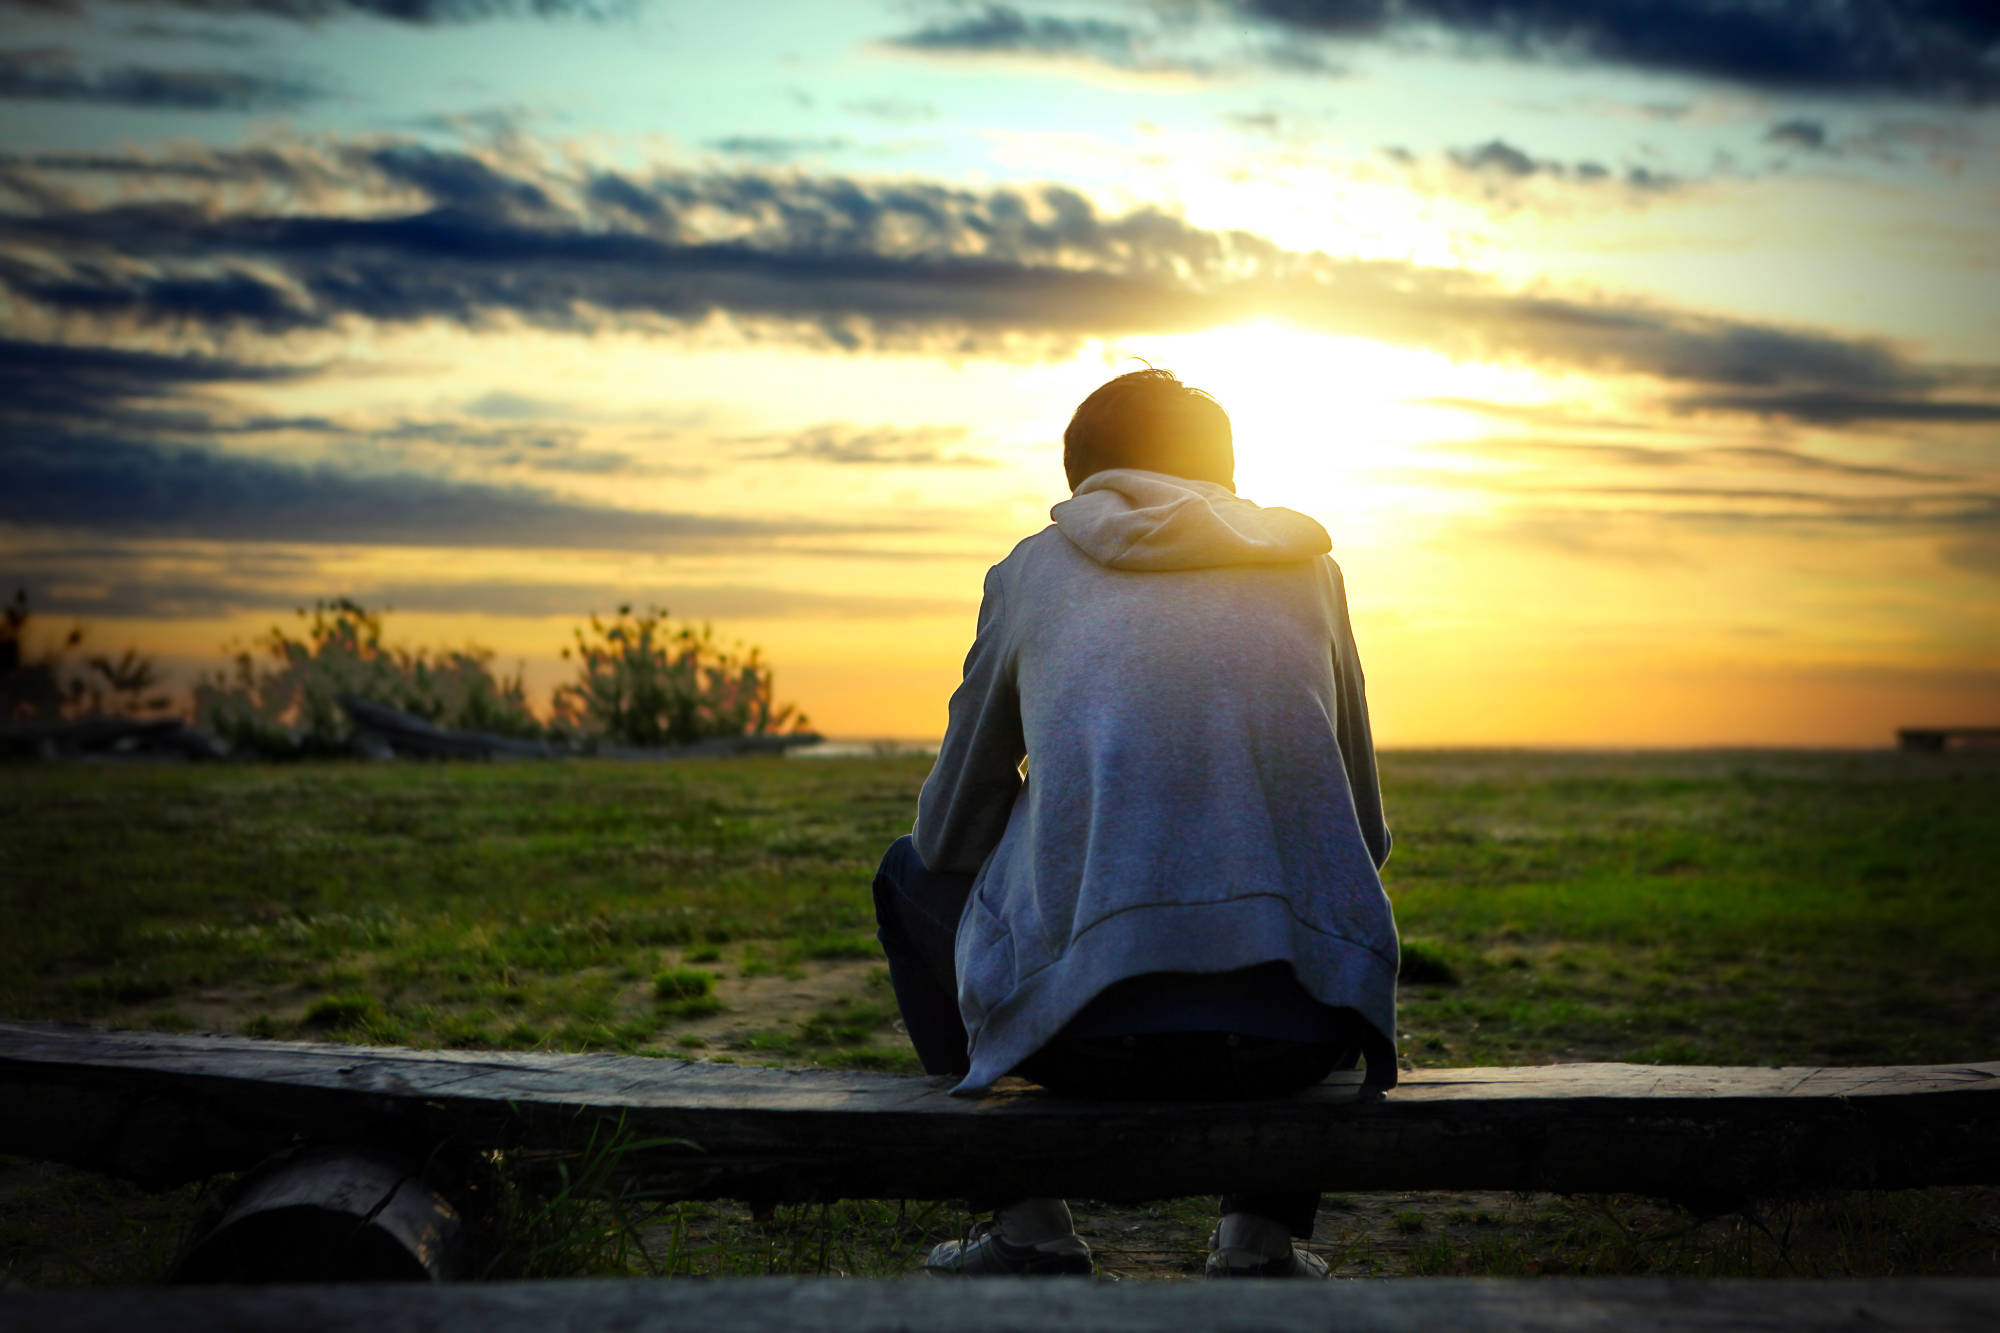 Young person sitting on the bench watching the sunset